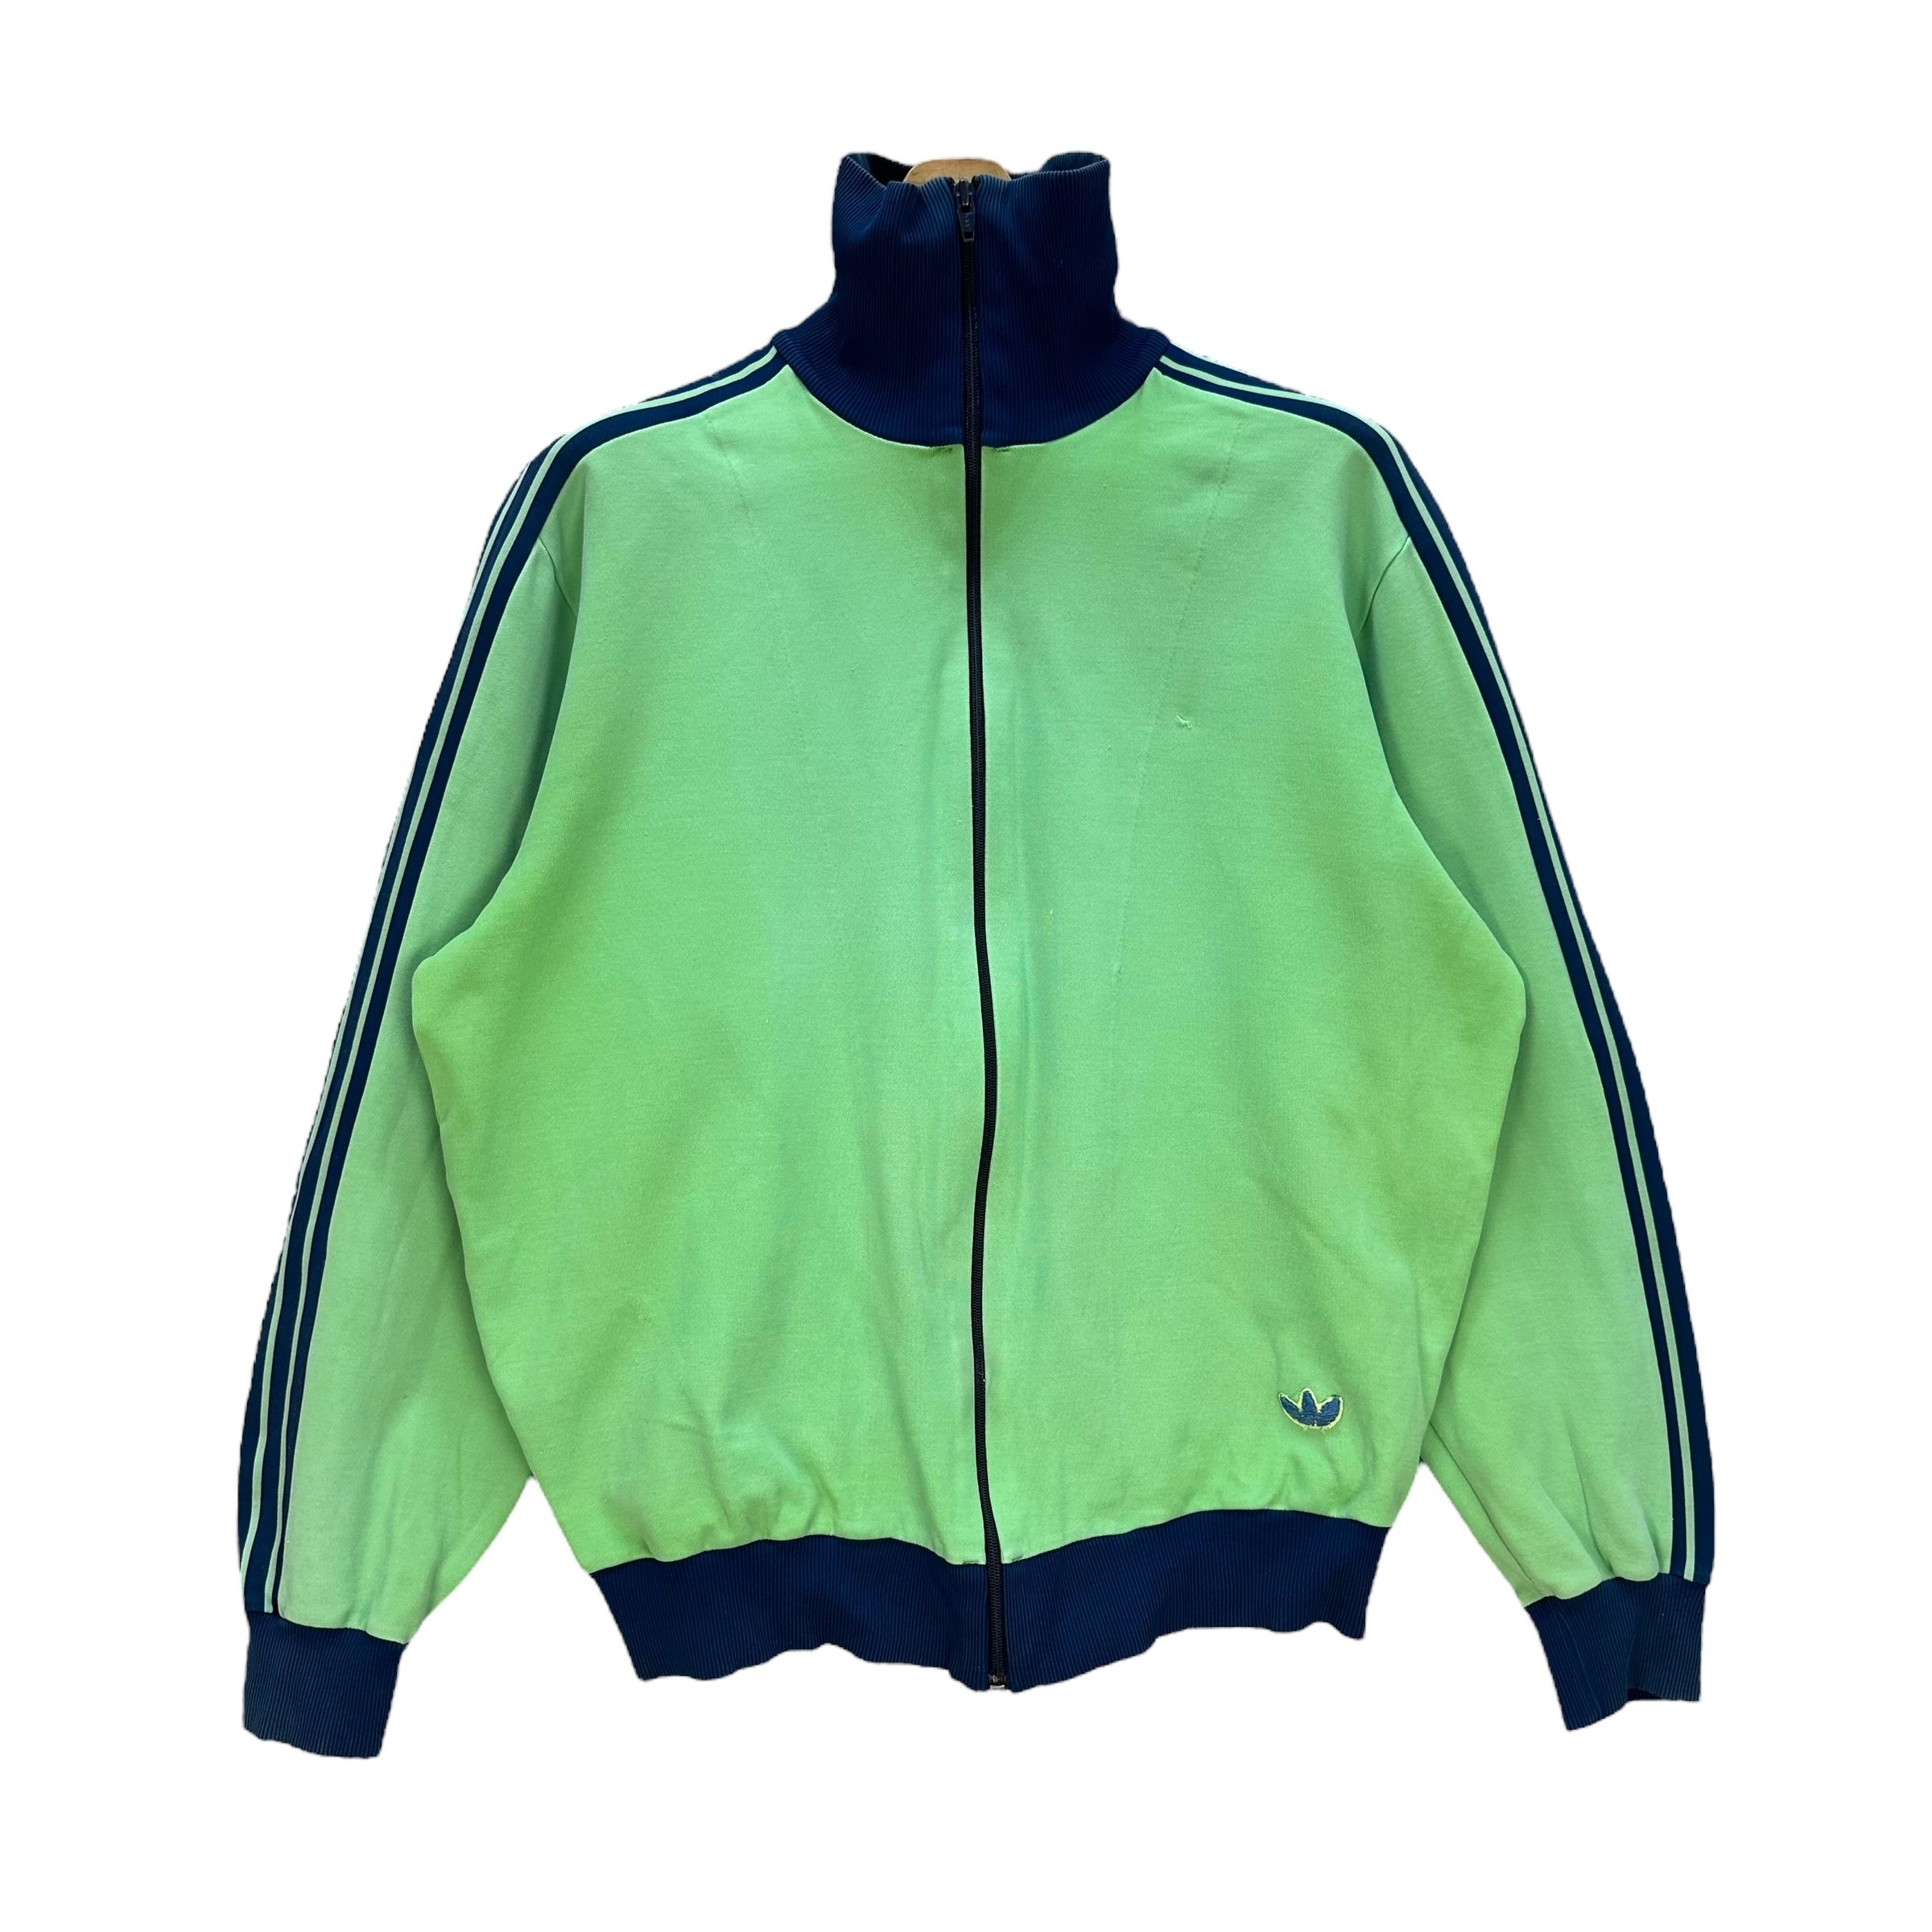 ADIDAS WEST GERMANY GREEN TRACK TOP JACKET #8817-028 - 1